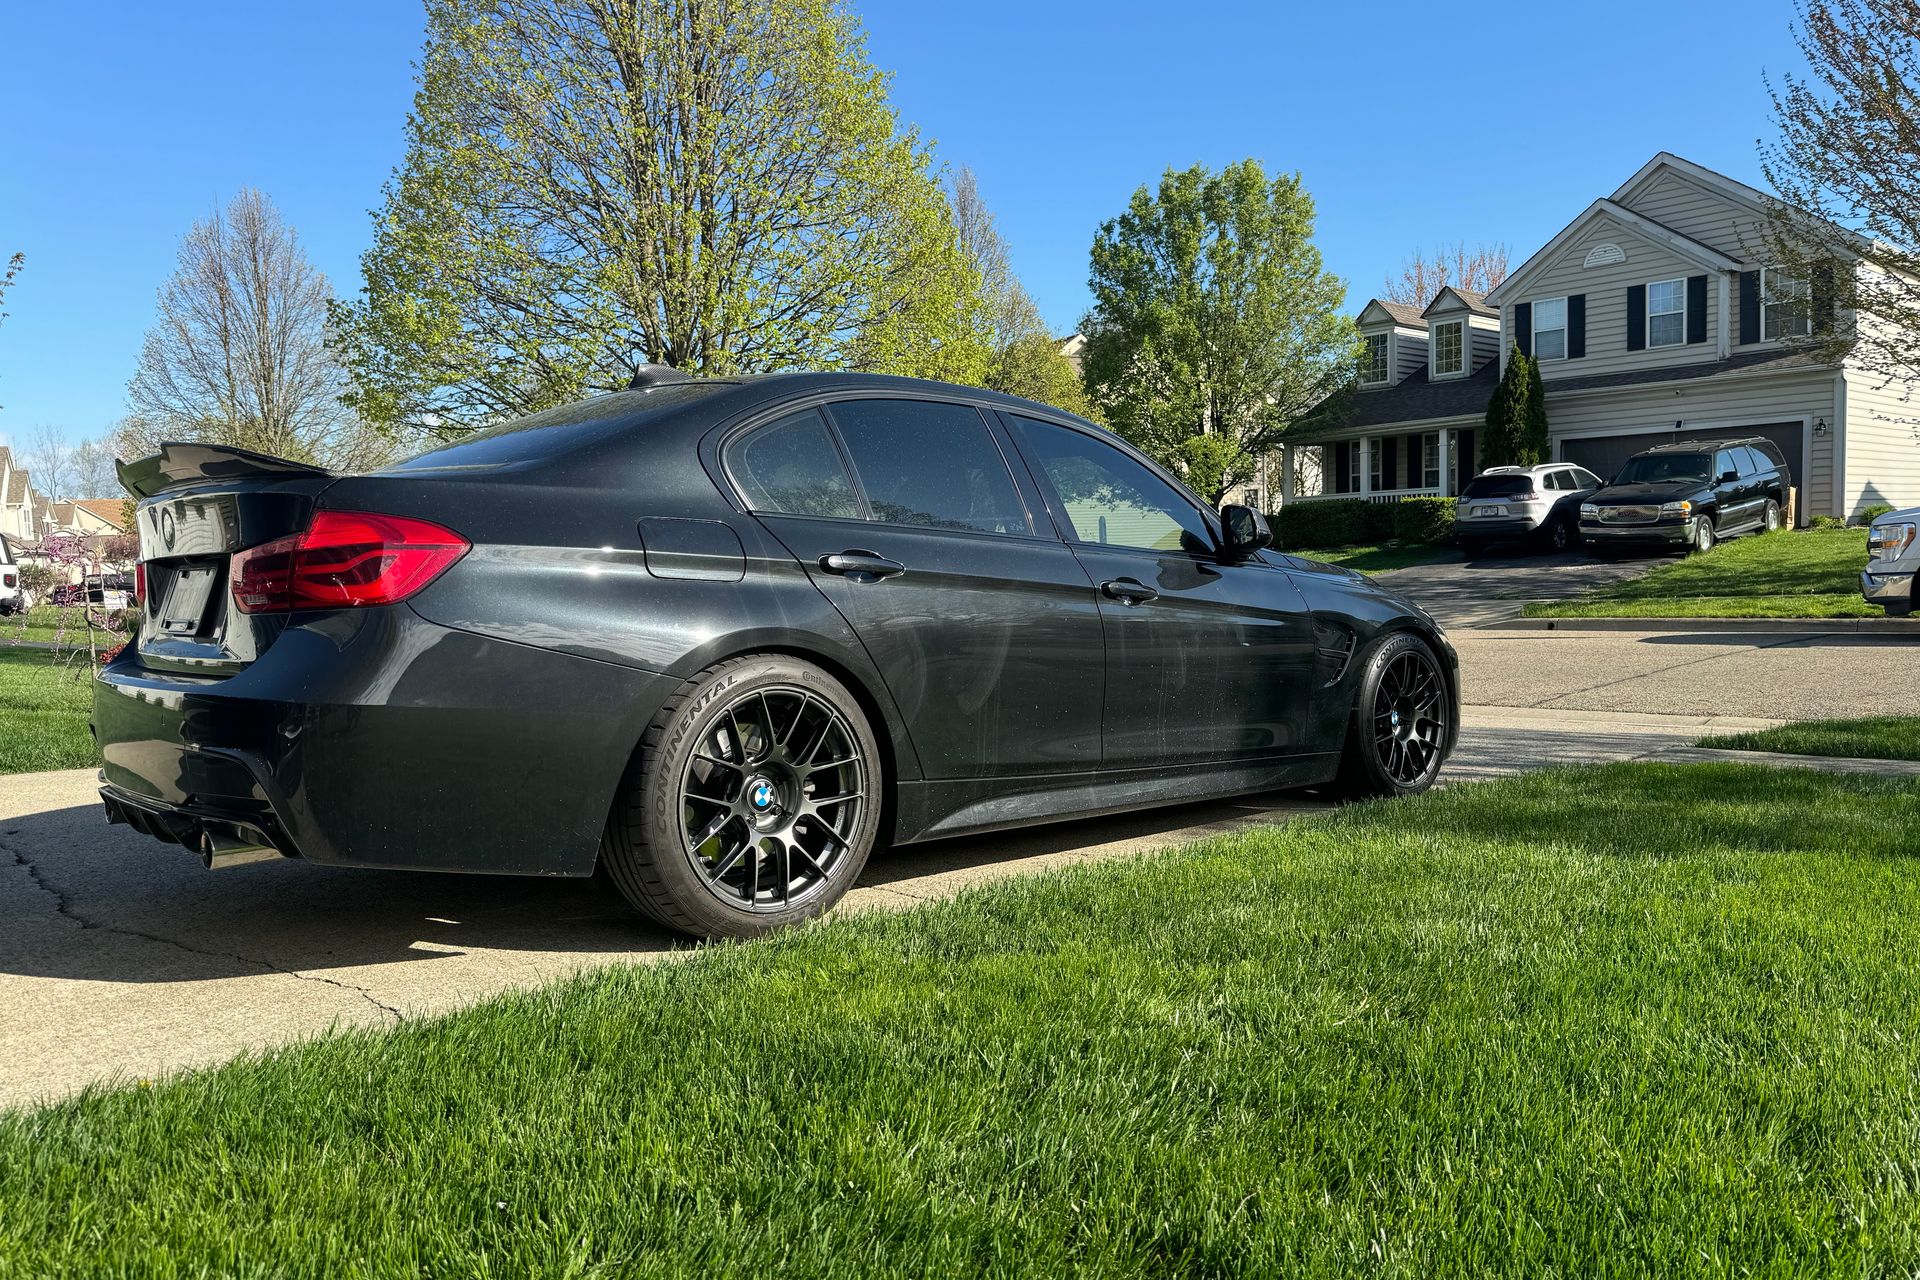 BMW F30 Sedan 3 Series with 18" EC-7RS in Anthracite